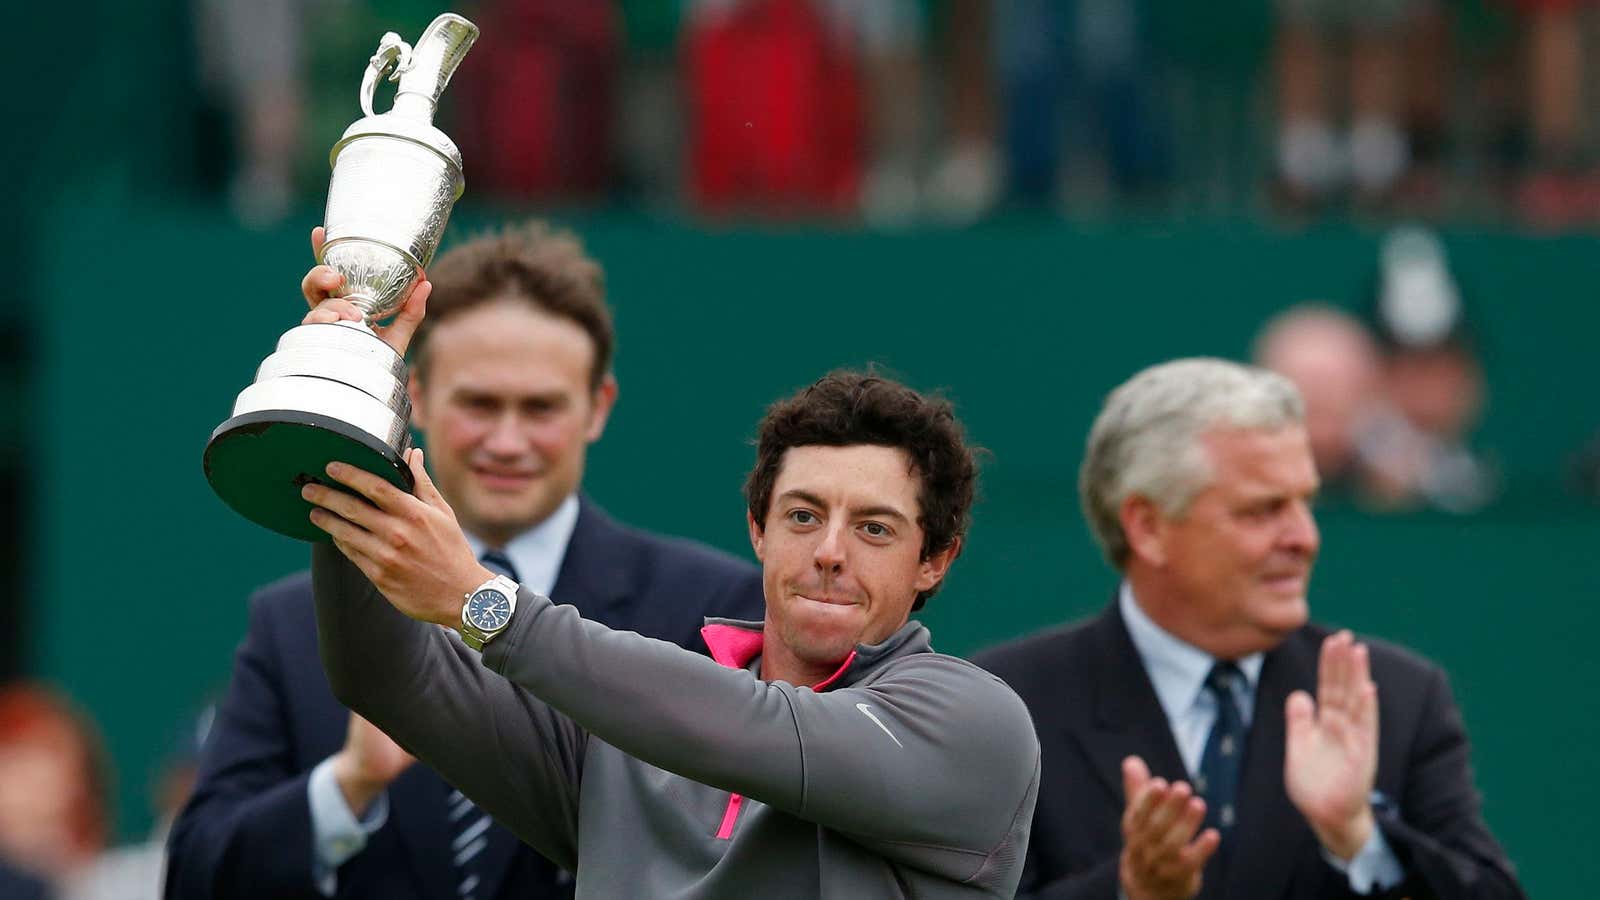 McIlroy has won all the majors in his first quarter century